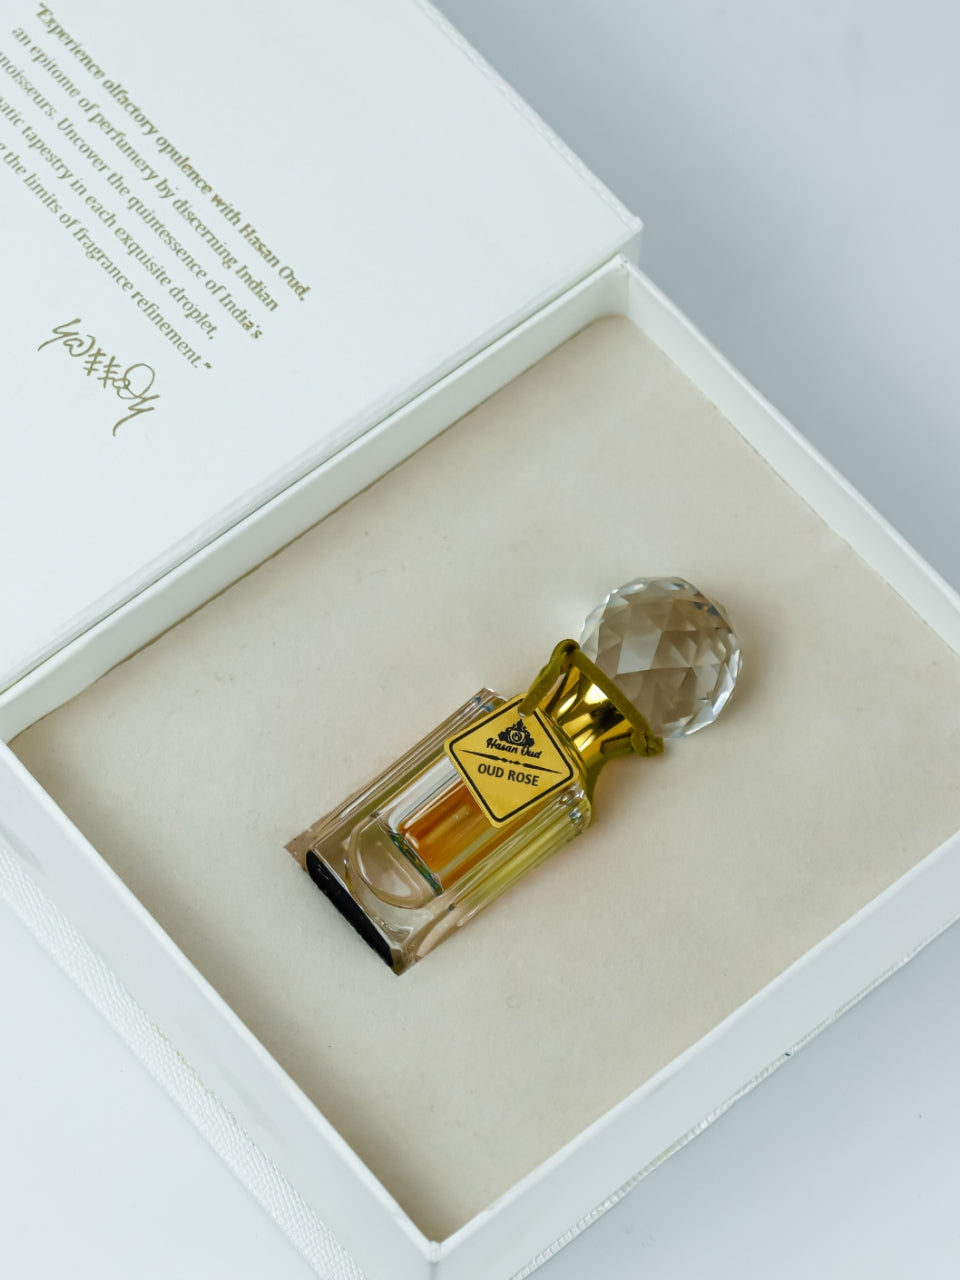 Oud Rose Premium Fragrance Alcohol free Attar By Hasanoud